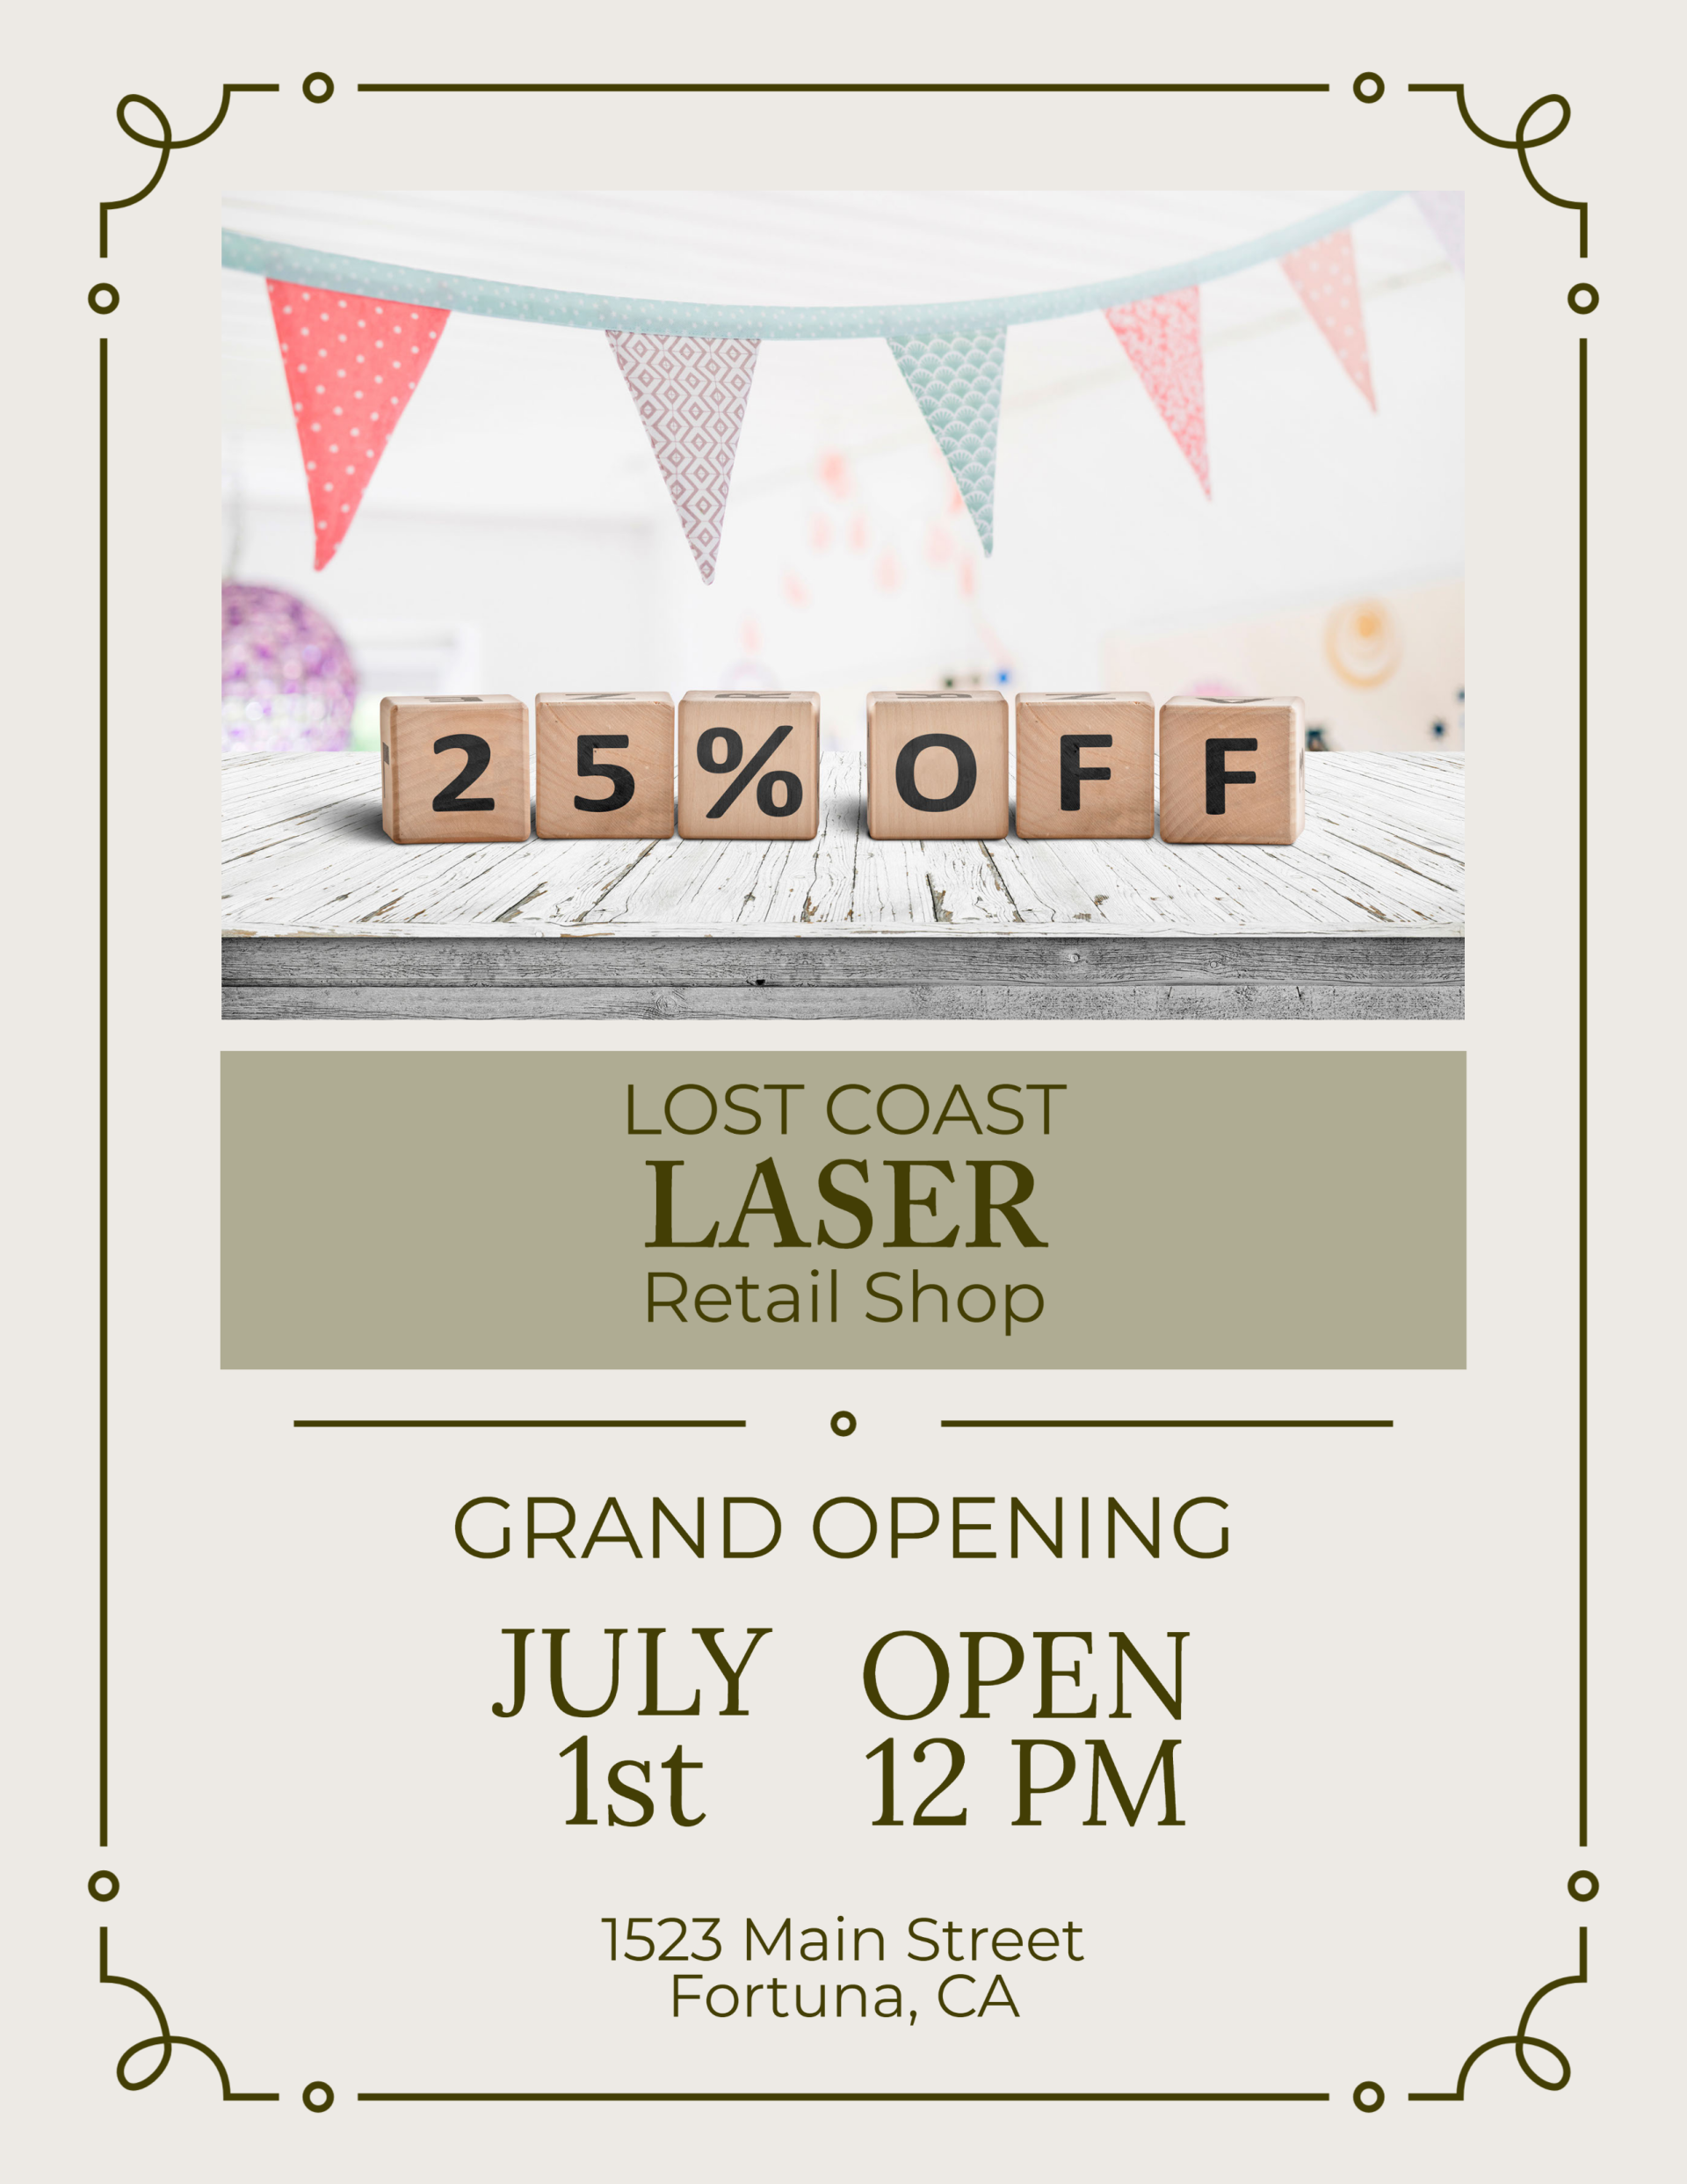 Grand Opening Retail Store Location Lost Coast Laser July 1, 2023